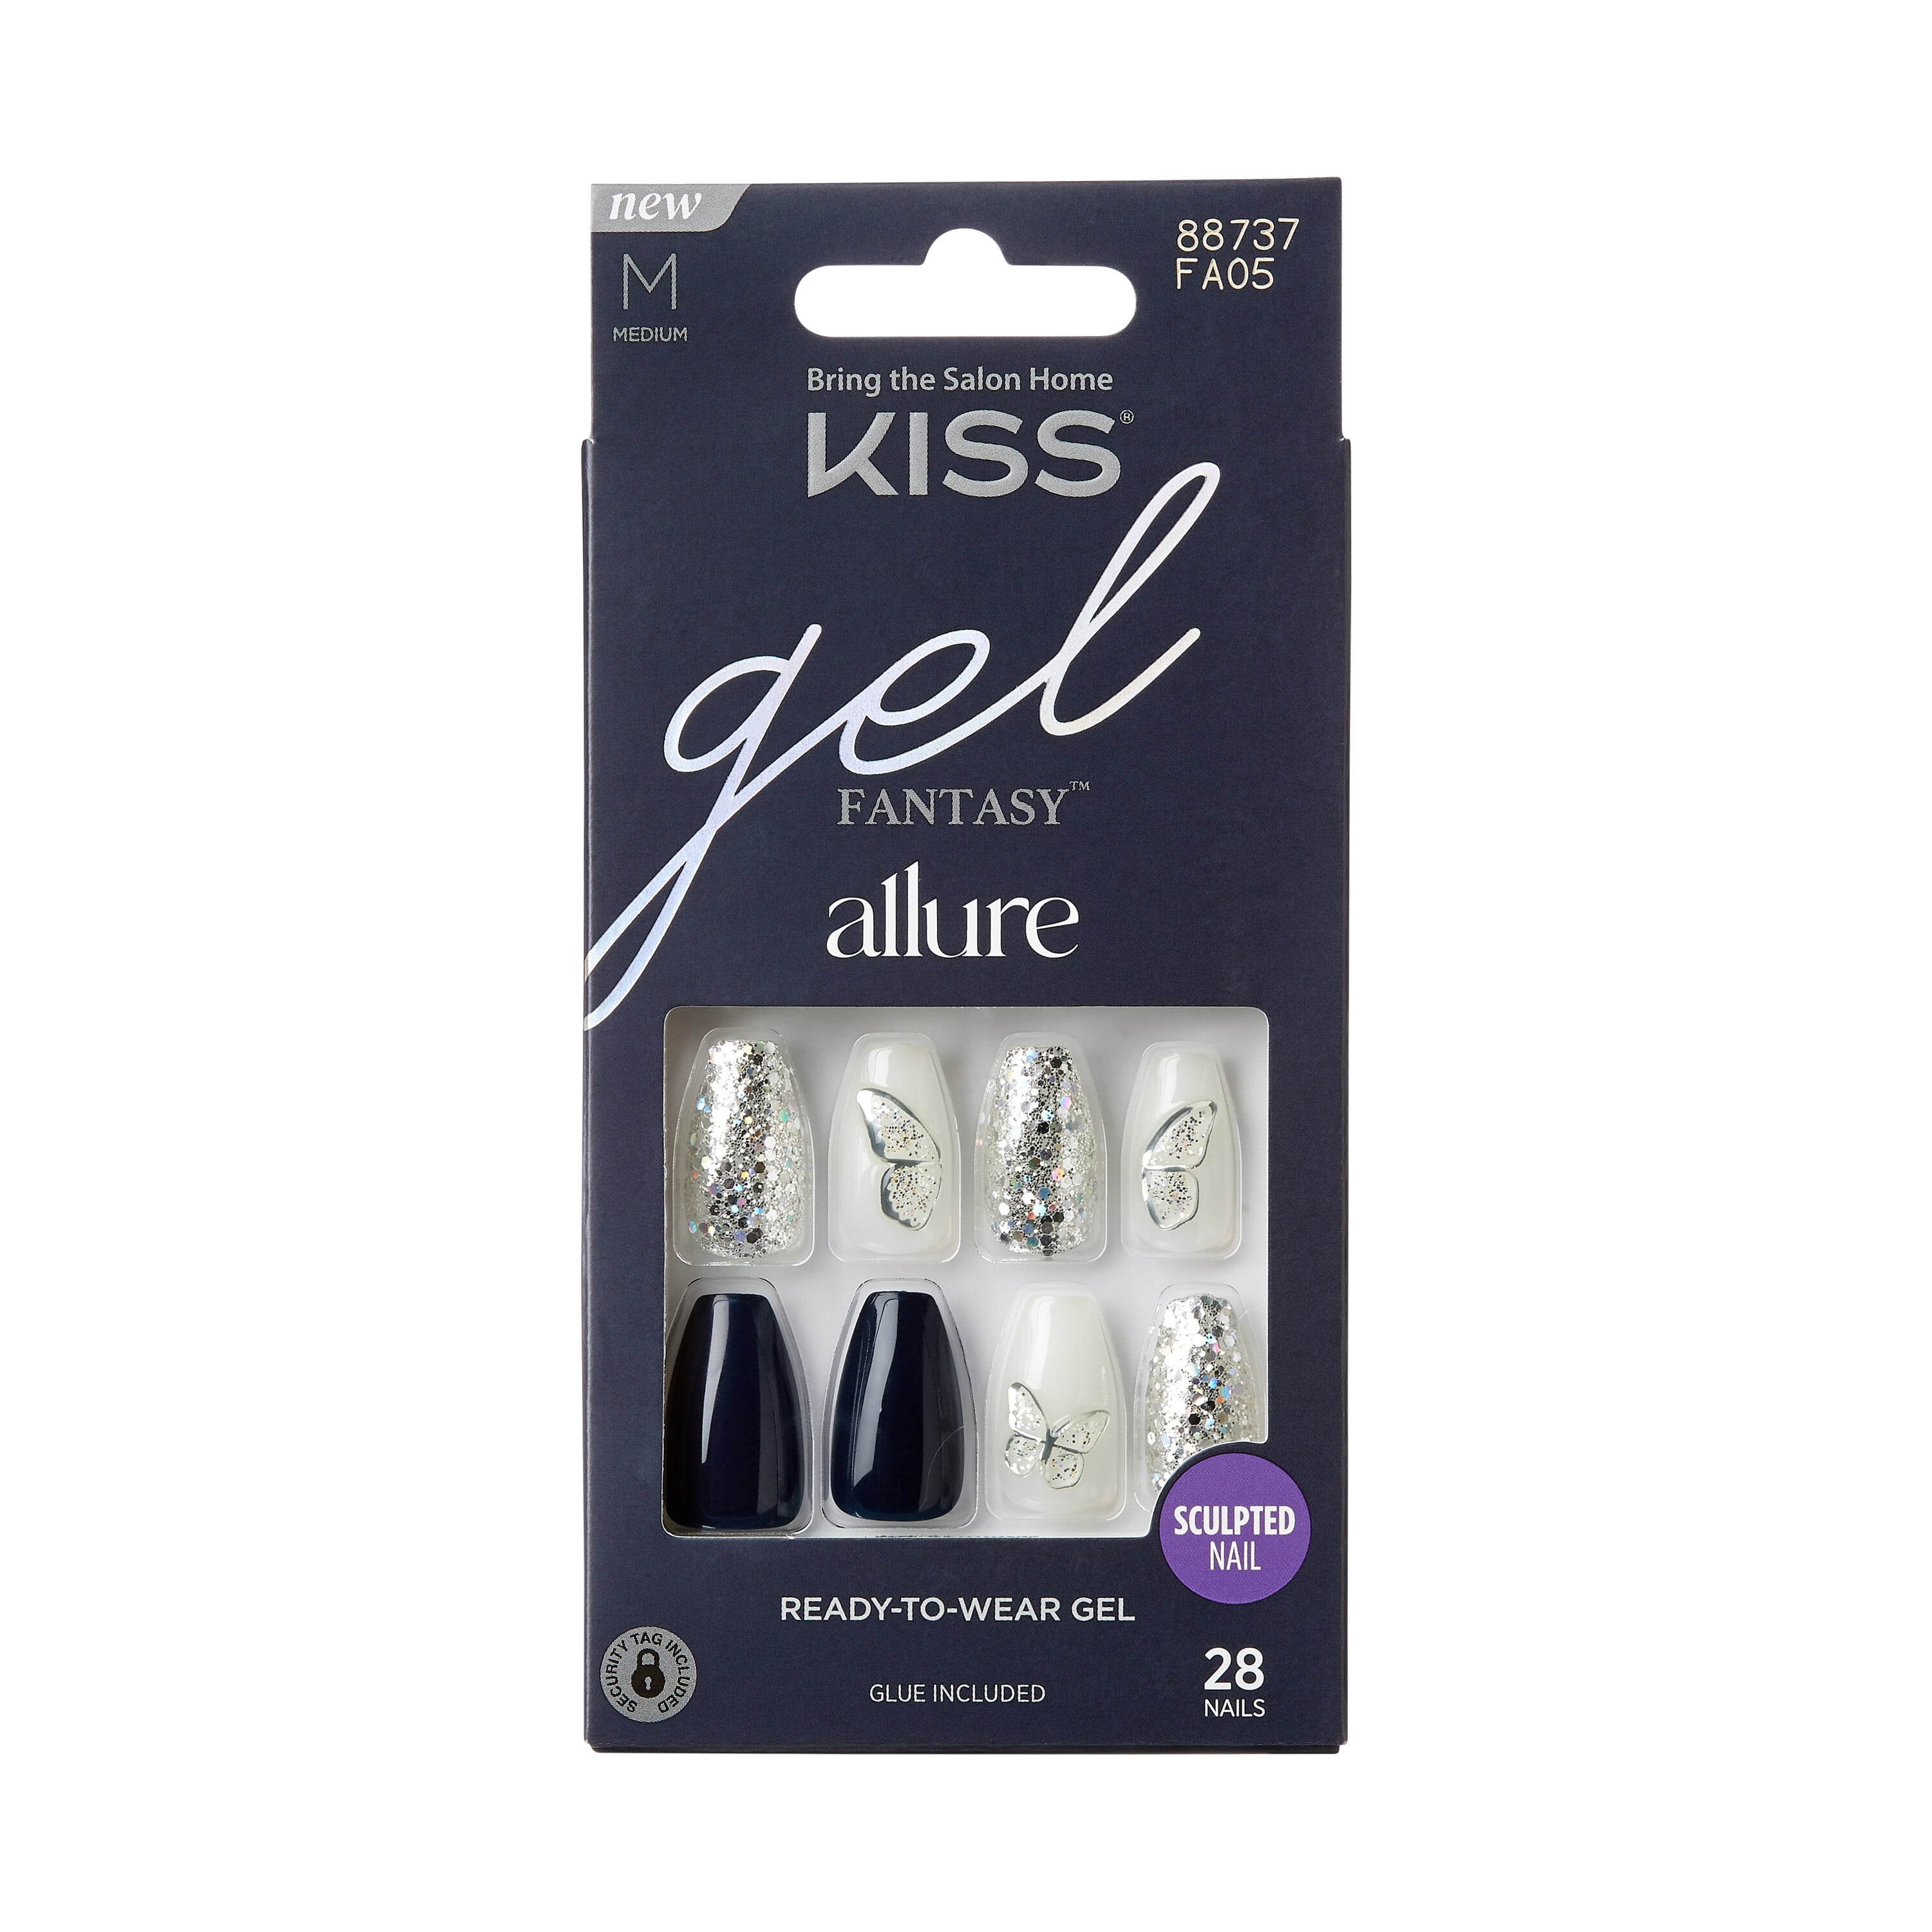 Kiss Products Salon Acrylic French Color Fake Nails - Pixie - 31ct : Target